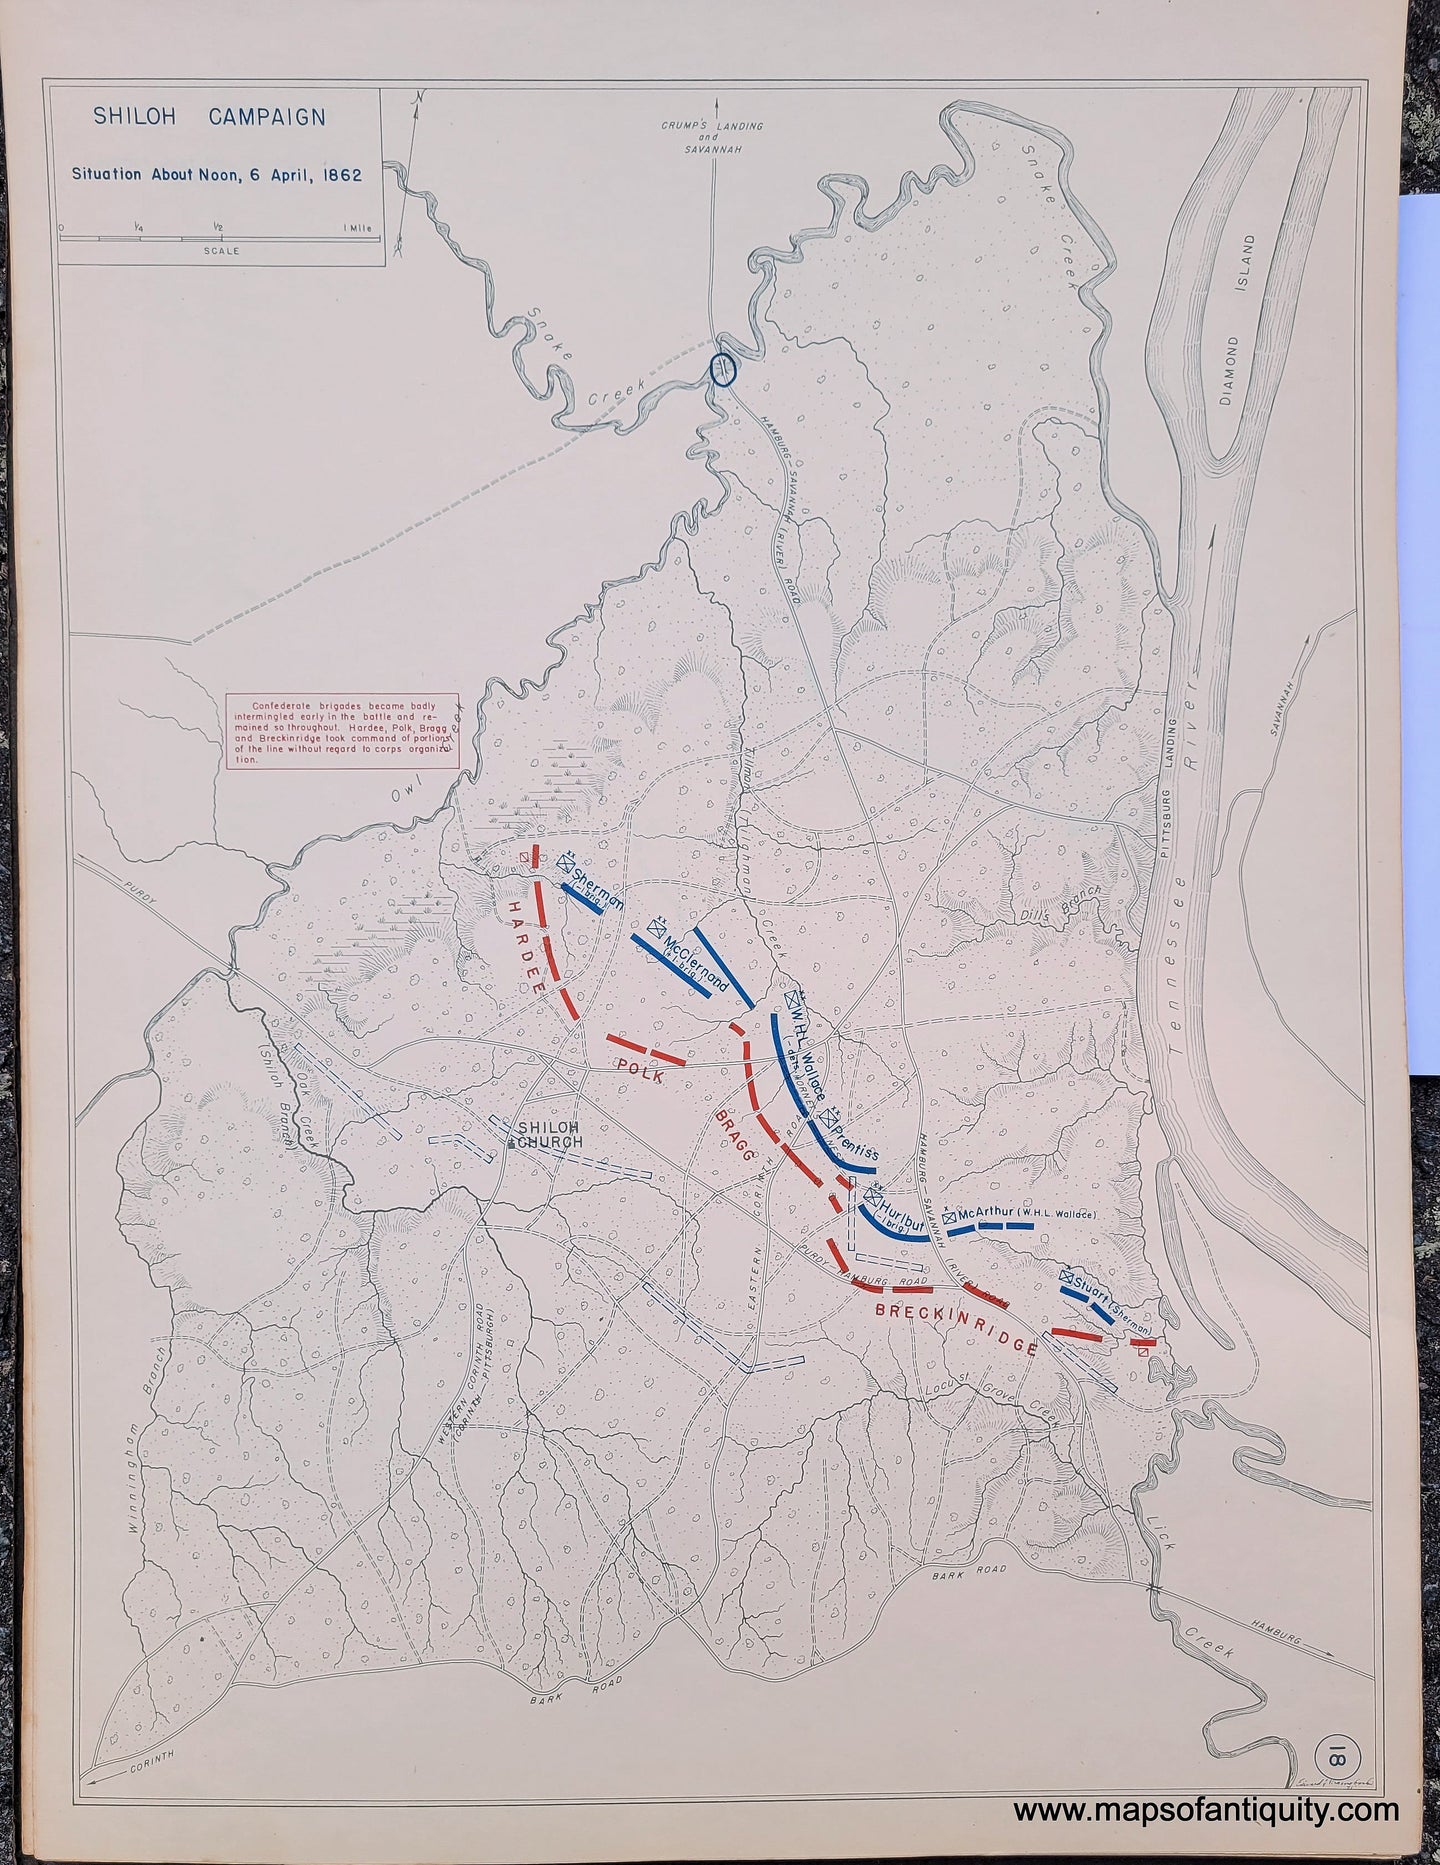 Genuine-Antique-Map-Shiloh-Campaign-Situation-About-Noon-6-April-1862-1948-Matthew-Forney-Steele-Dept-of-Military-Art-and-Engineering-US-Military-Academy-West-Point-Maps-Of-Antiquity